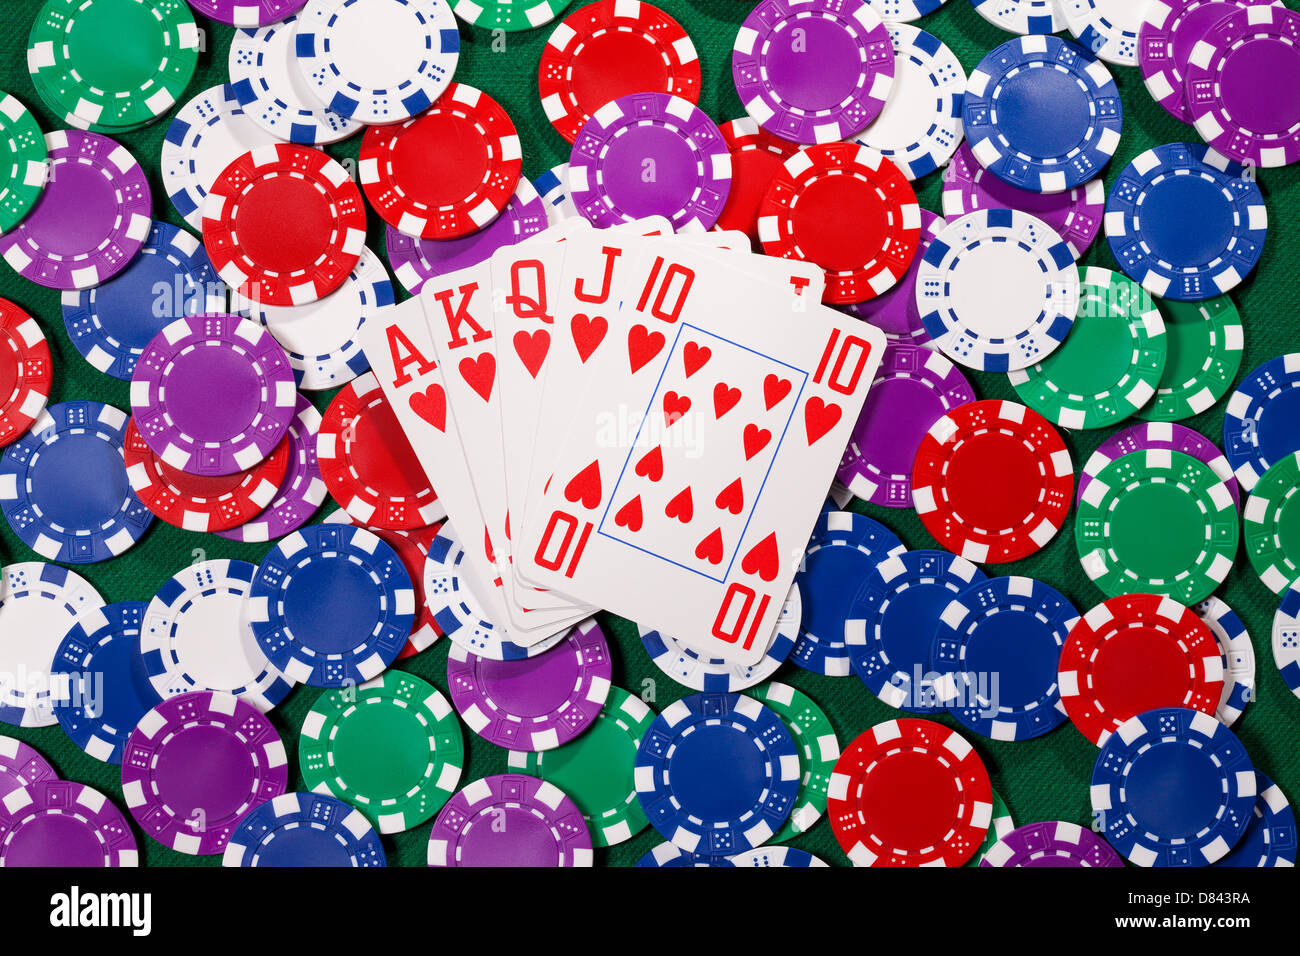 Poker chips and cards closeup on green cloth Stock Photo